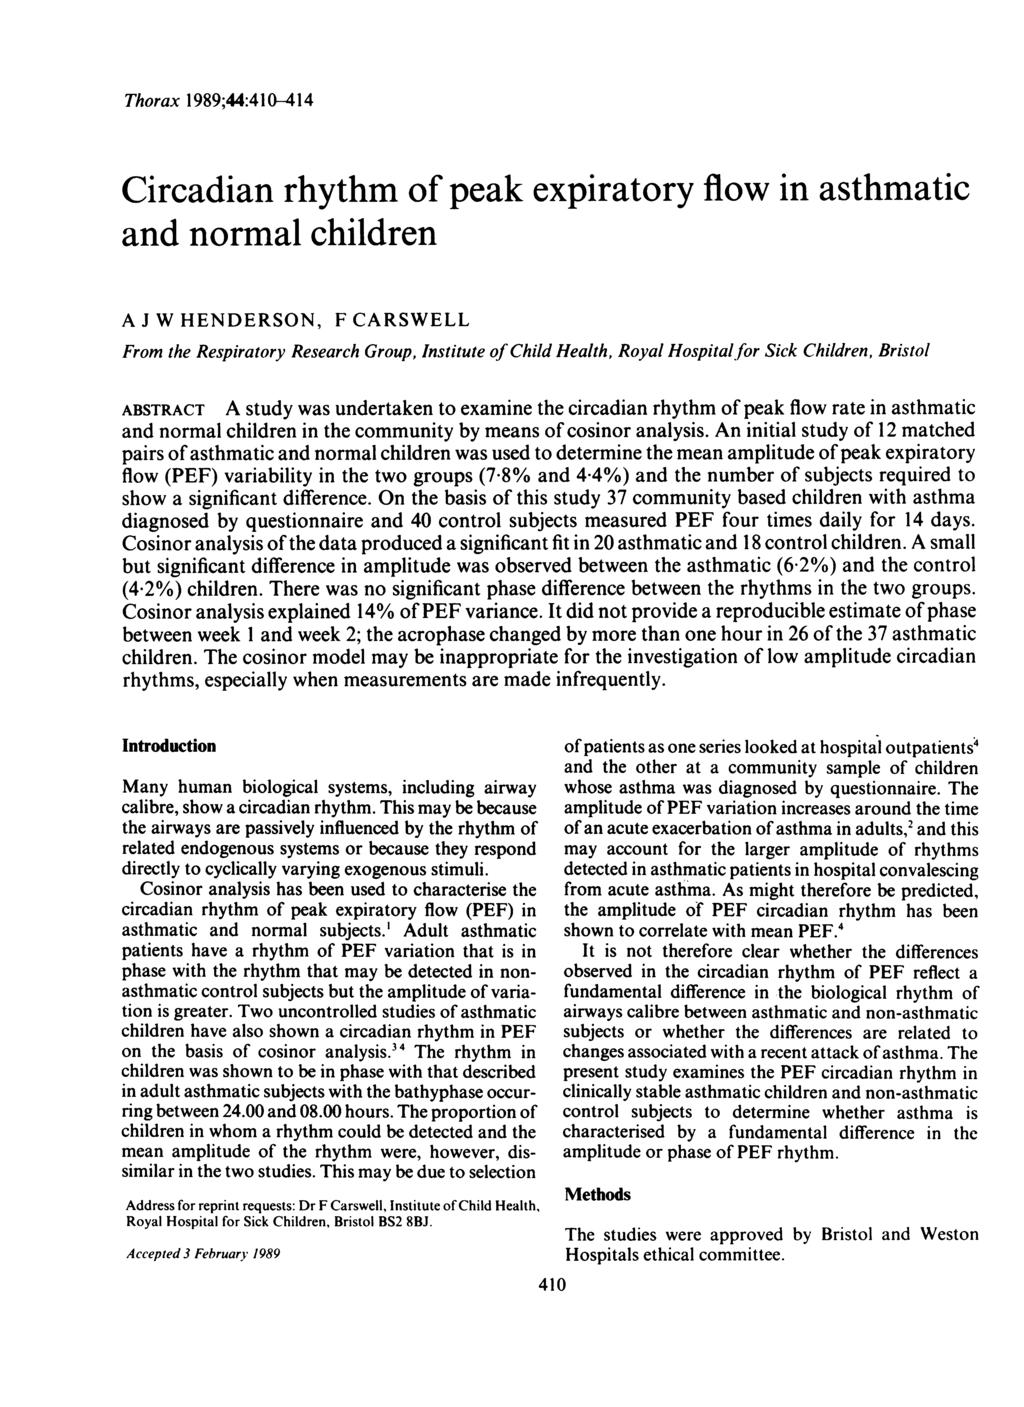 Thorax 1;:10-1 Circadian rhythm of peak expiratory flow in asthmatic and normal children A J W HENDERSON, F CARSWELL From the Respiratory Research Group, Institute of Child Health, Royal Hospital for